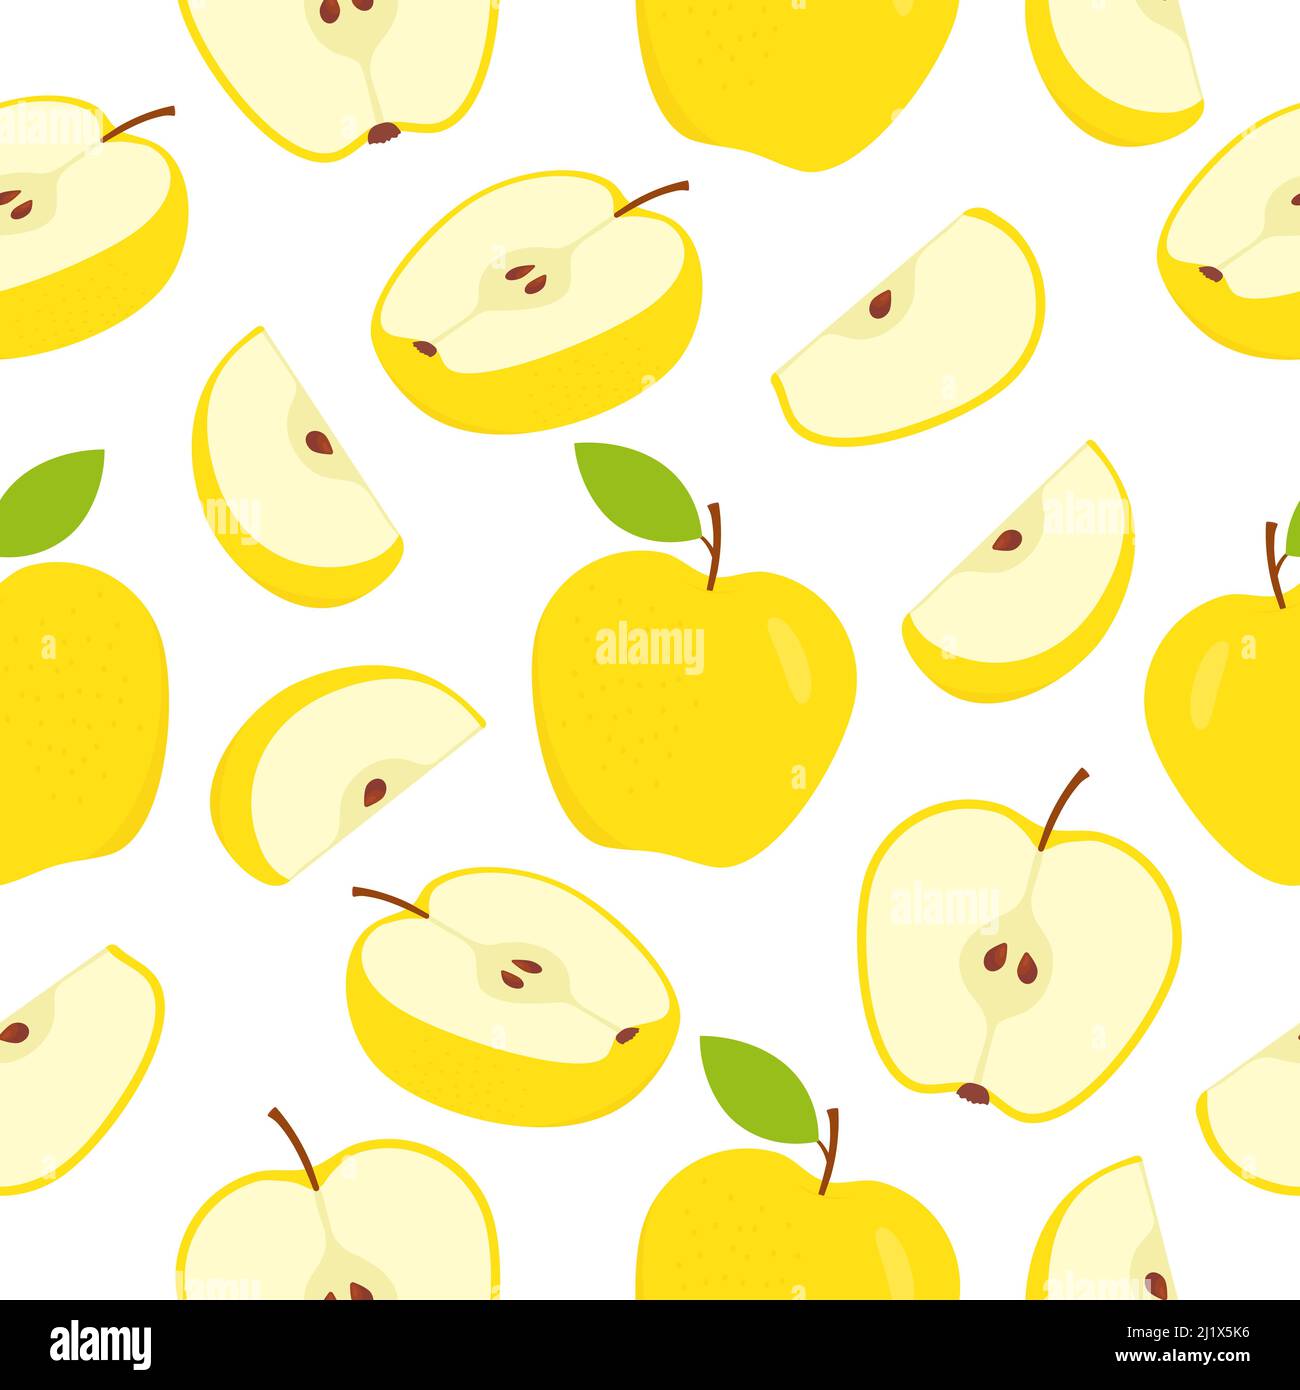 Seamless apple pattern. Sliced green apples white background. Sweet cute fruits texture. Vector illustration Stock Vector